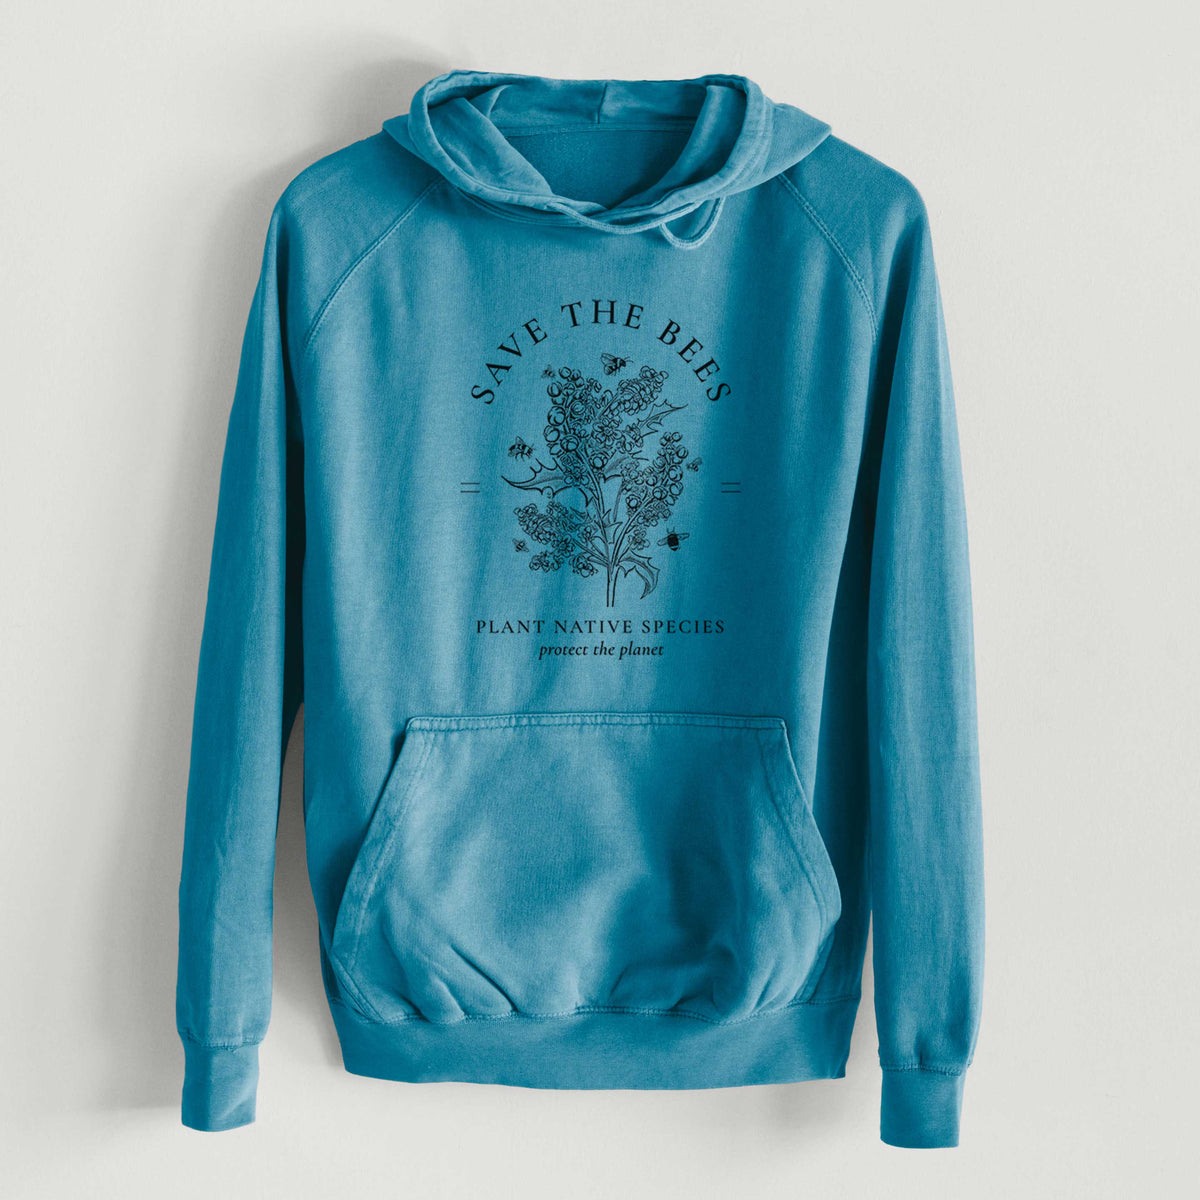 Save the Bees - Plant Native Species  - Mid-Weight Unisex Vintage 100% Cotton Hoodie